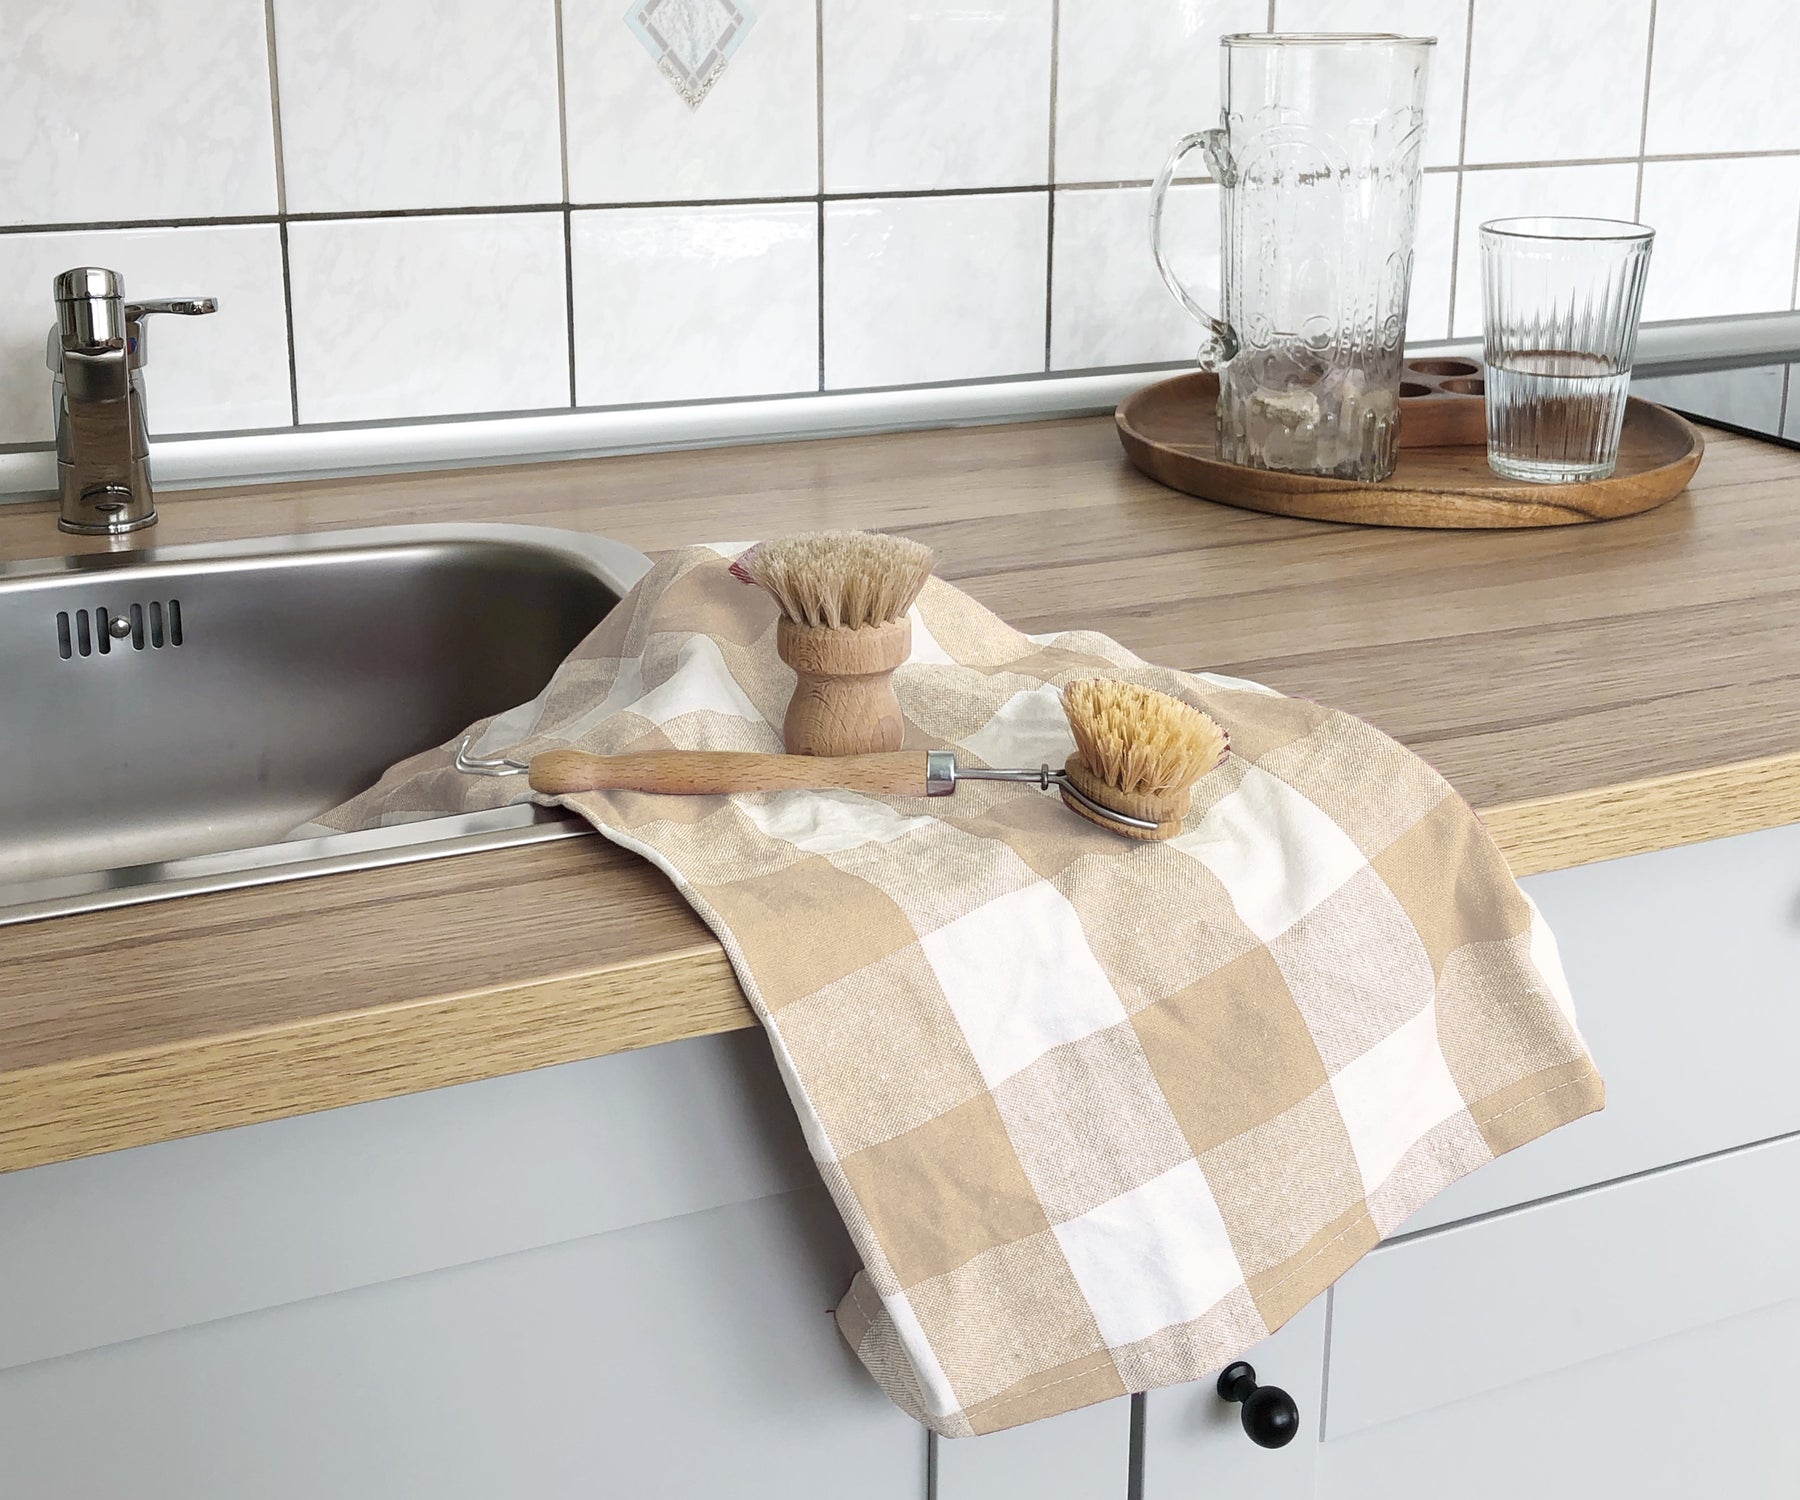 Hand towels for kitchen are perfect for drying hands after washing up or for wiping down surfaces.